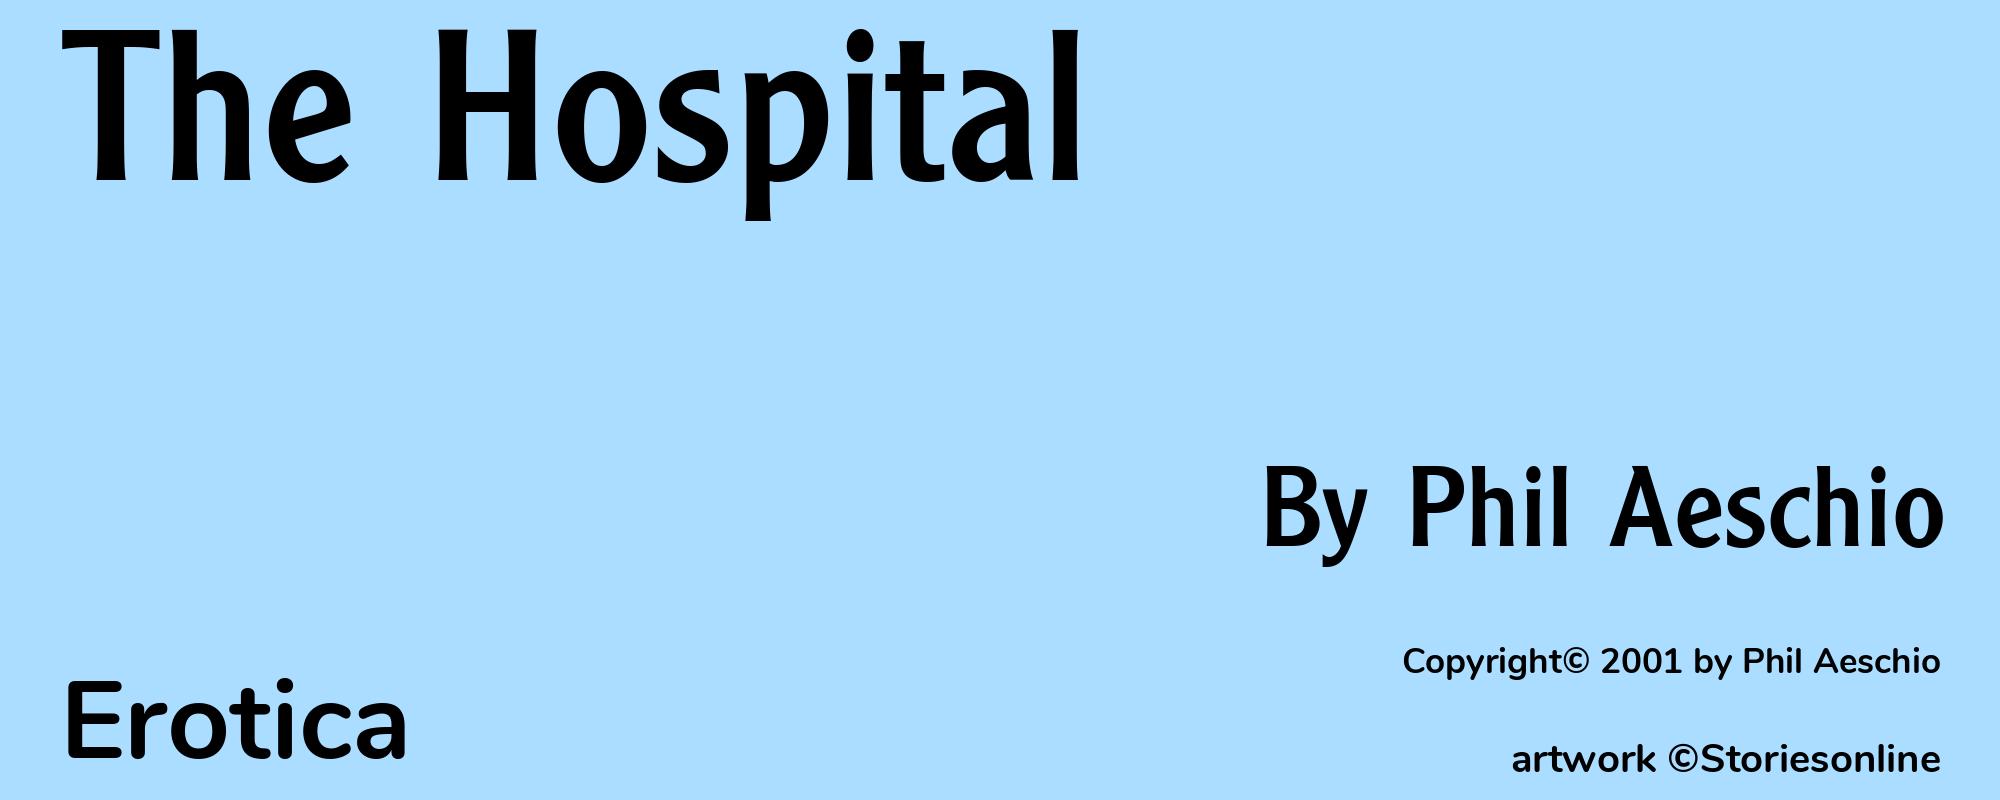 The Hospital - Cover